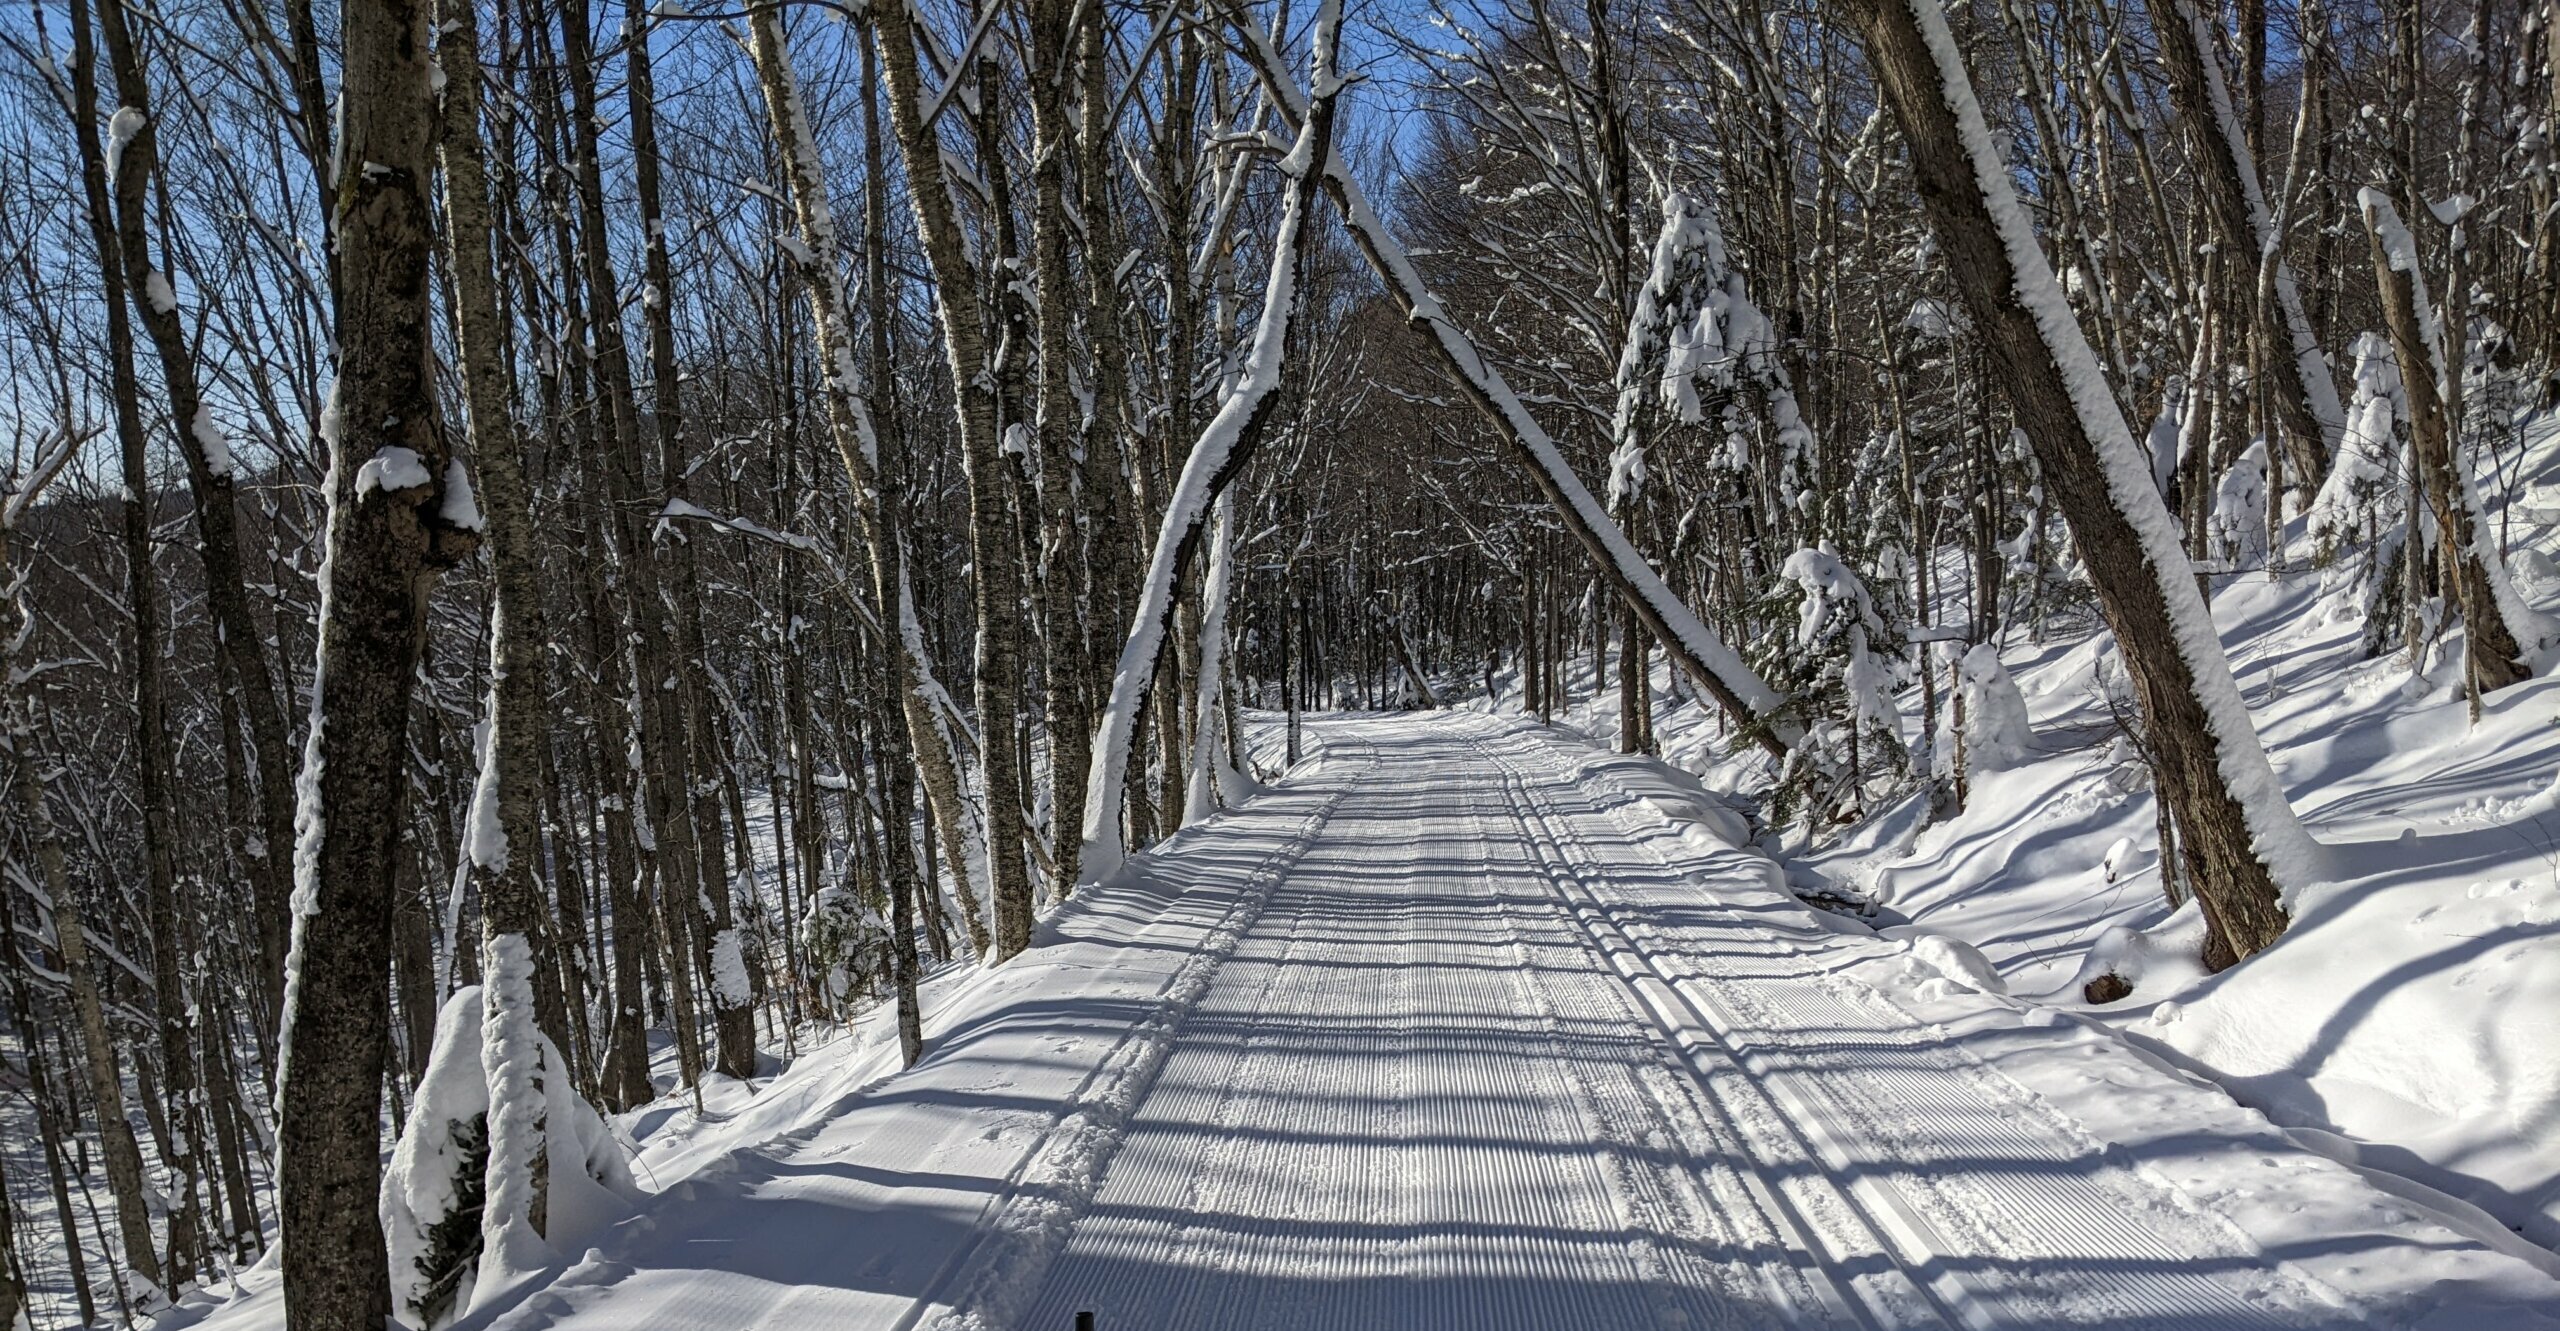 Grooming equipment creating fines lines on a cross country trail on a blue sky day